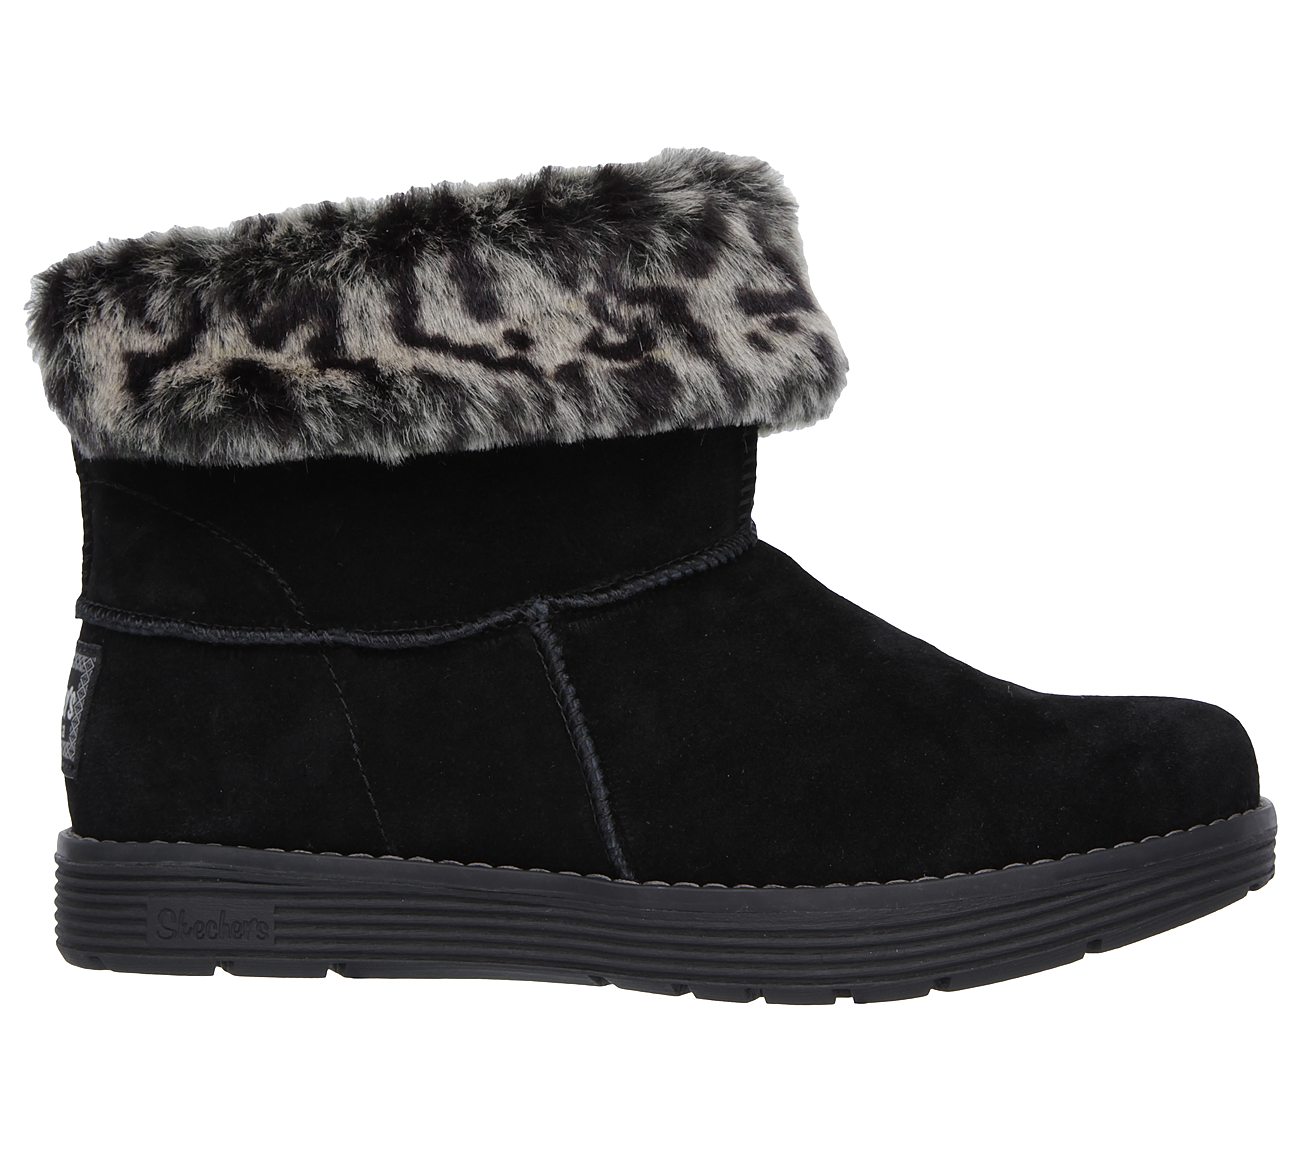 skechers adorbs polar boots Sale,up to 